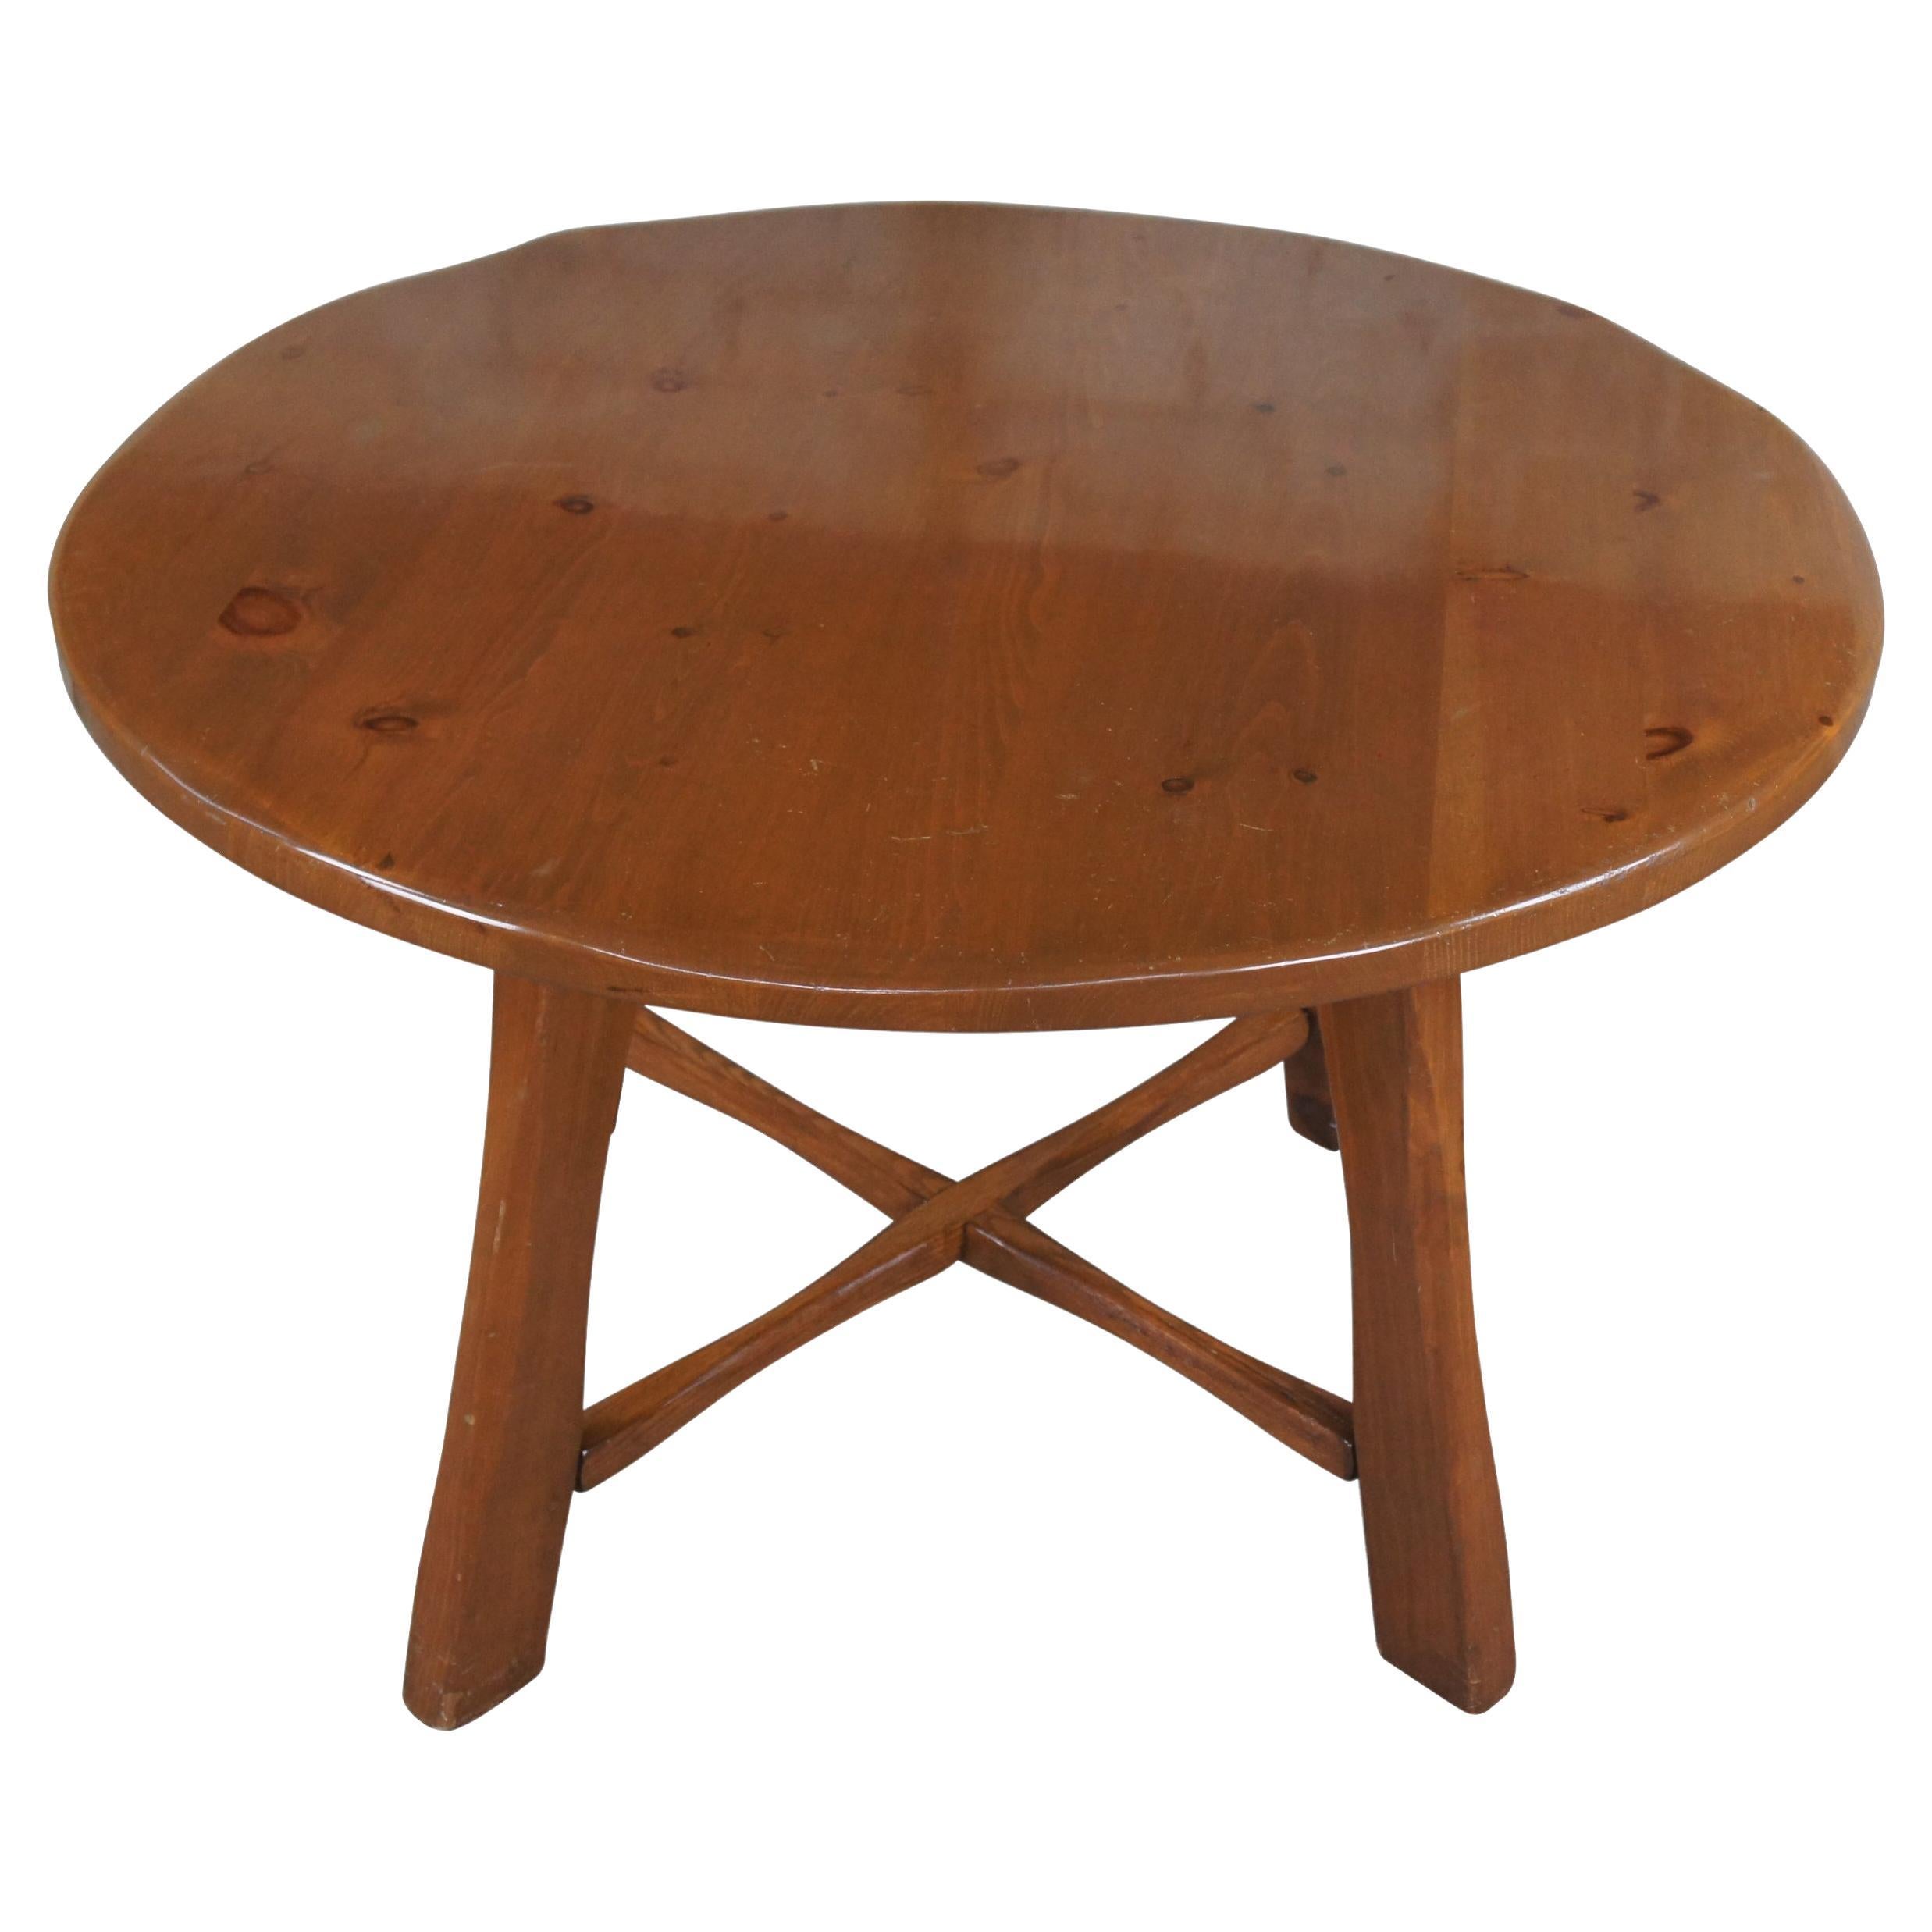 Handmade Vintage Pine American Country Farmhouse Round Dining Breakfast Table